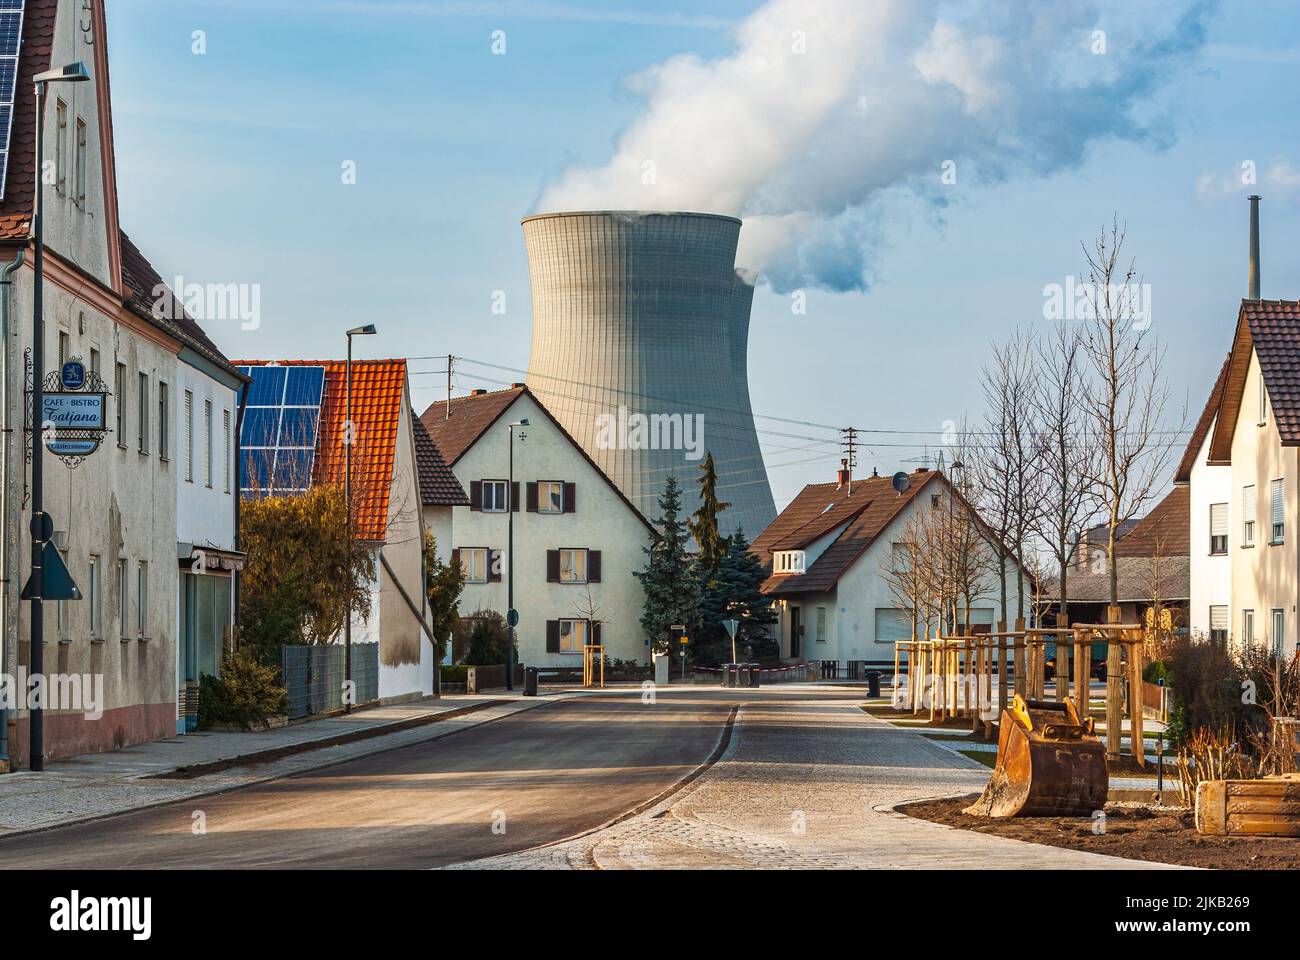 Gundremmingen, Bavaria, Germany - March 25, 2011: The village and nuclear power plant of Gundremmingen in the administrative district of Swabia. Stock Photo